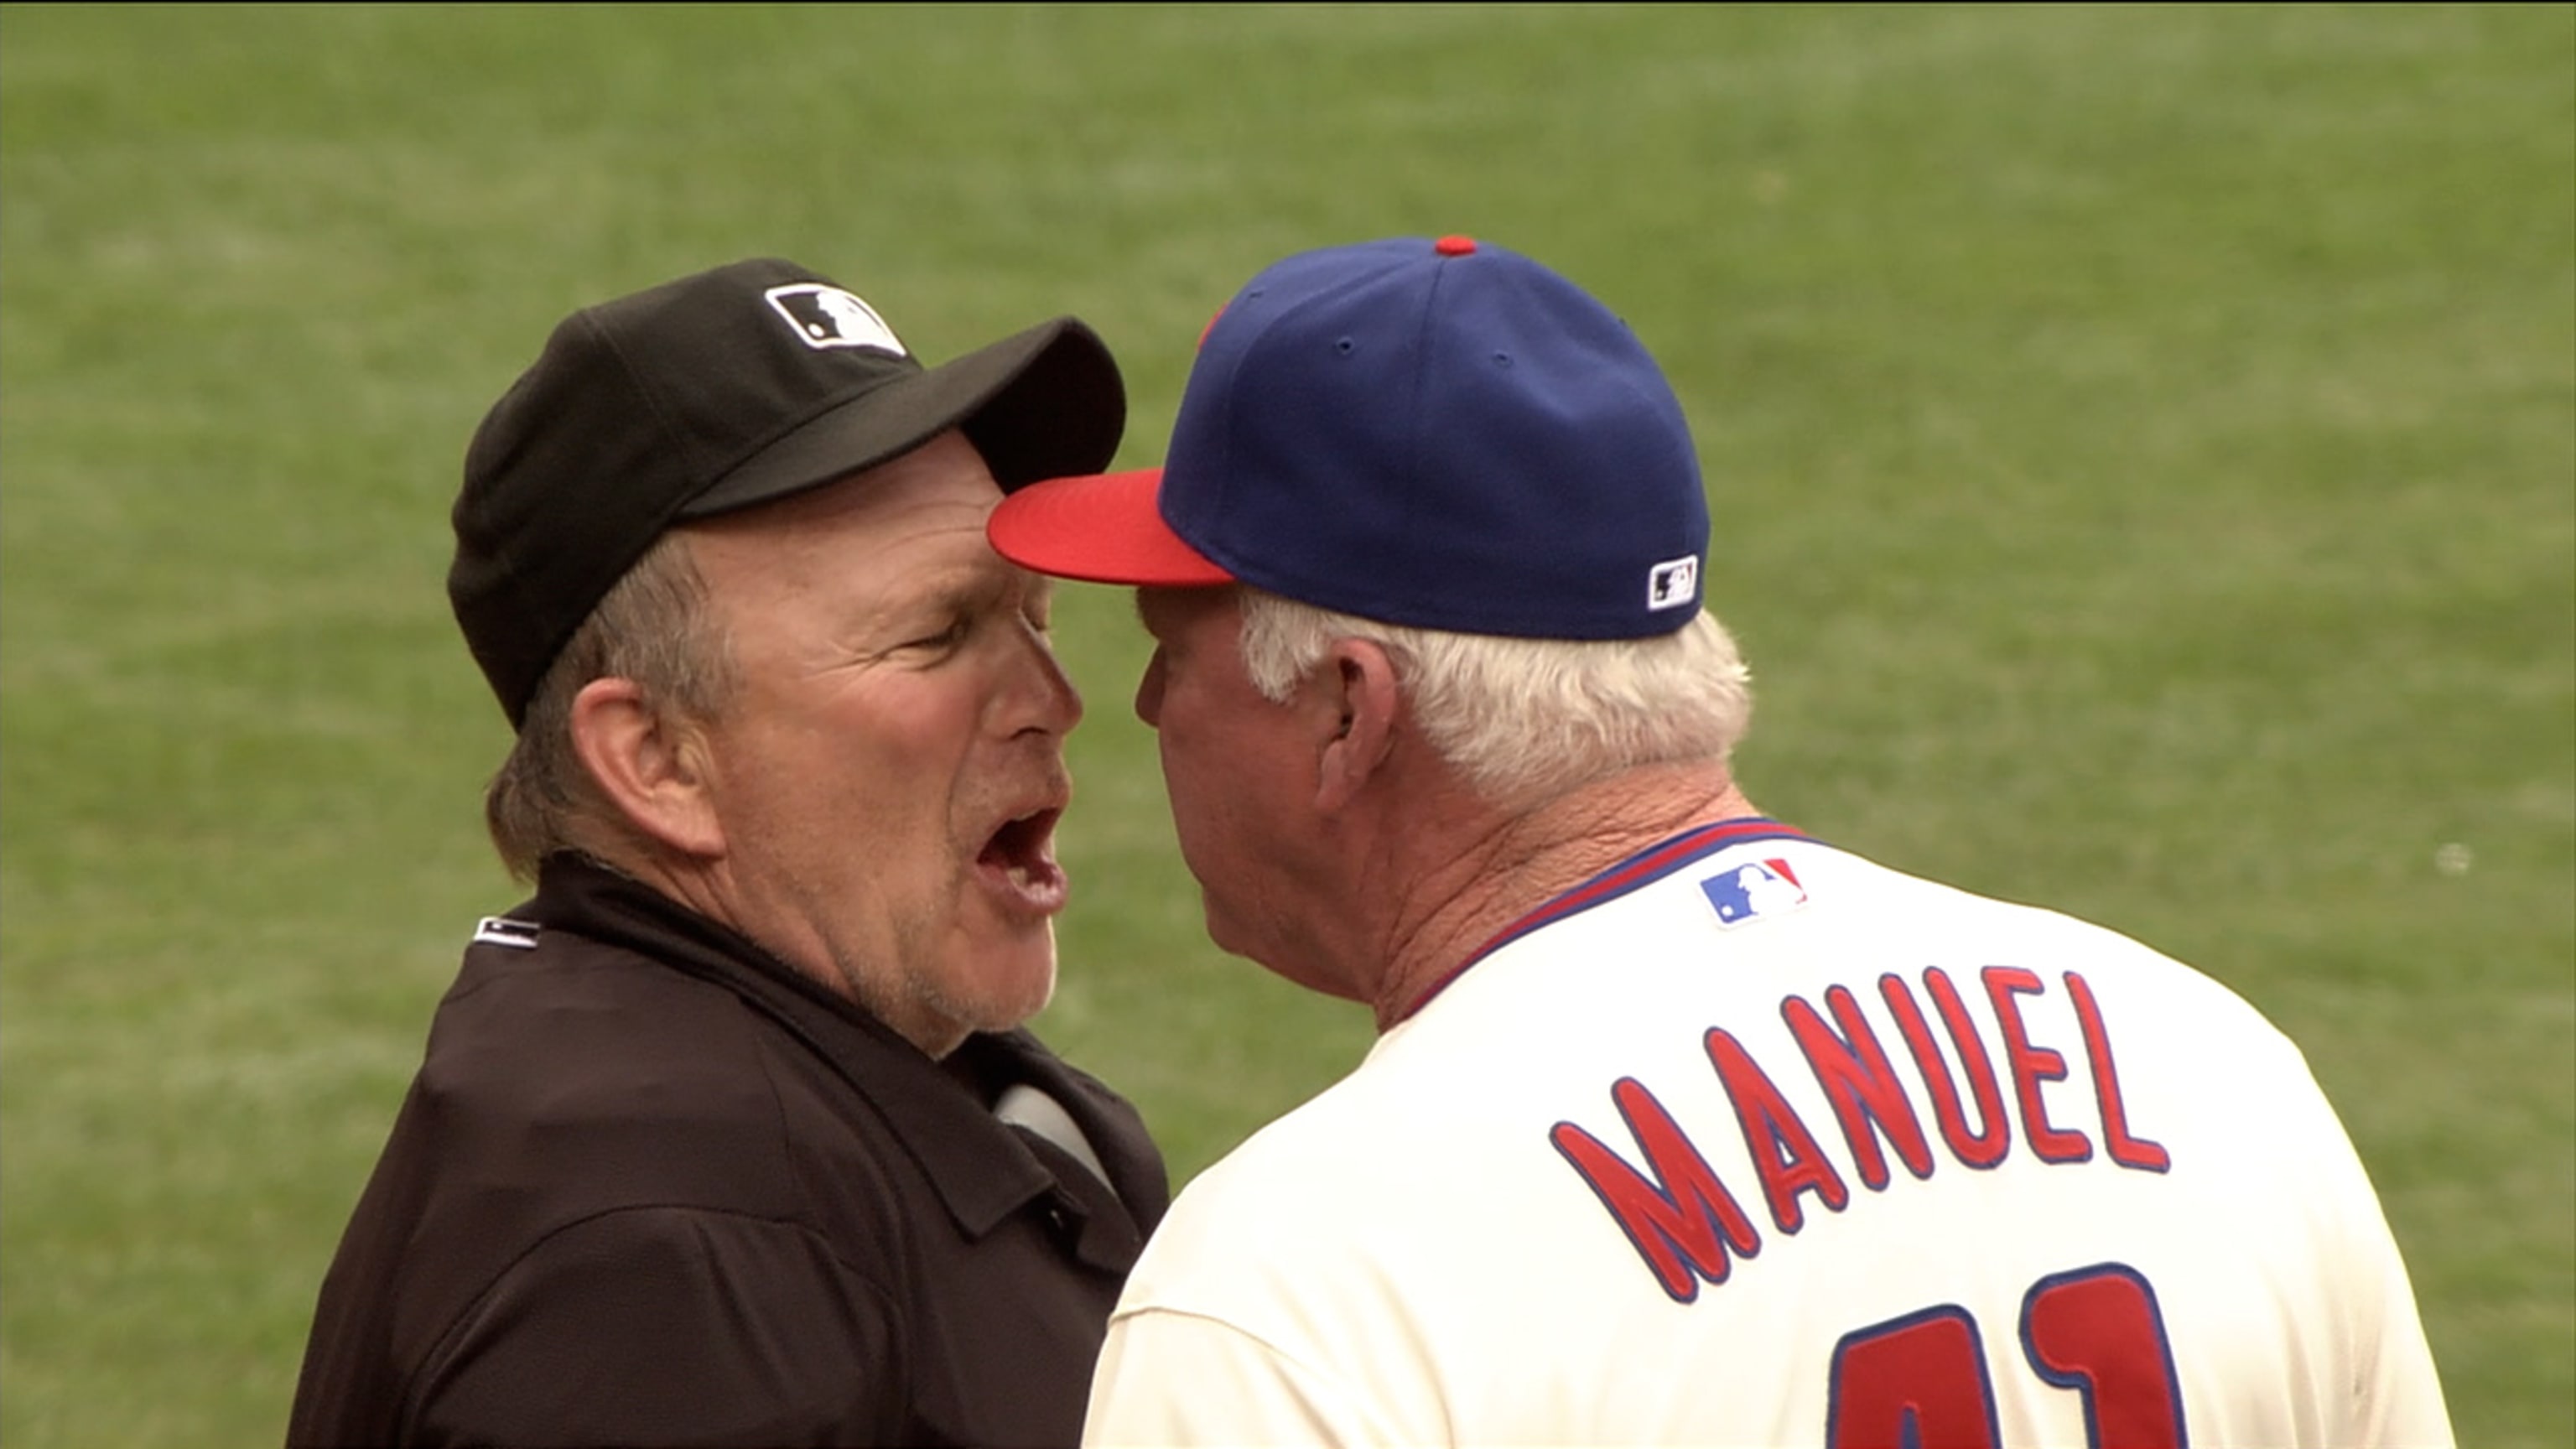 Legendary Phillies manager Charlie Manuel suffers major medical episode  while former baseball star underwent surgery